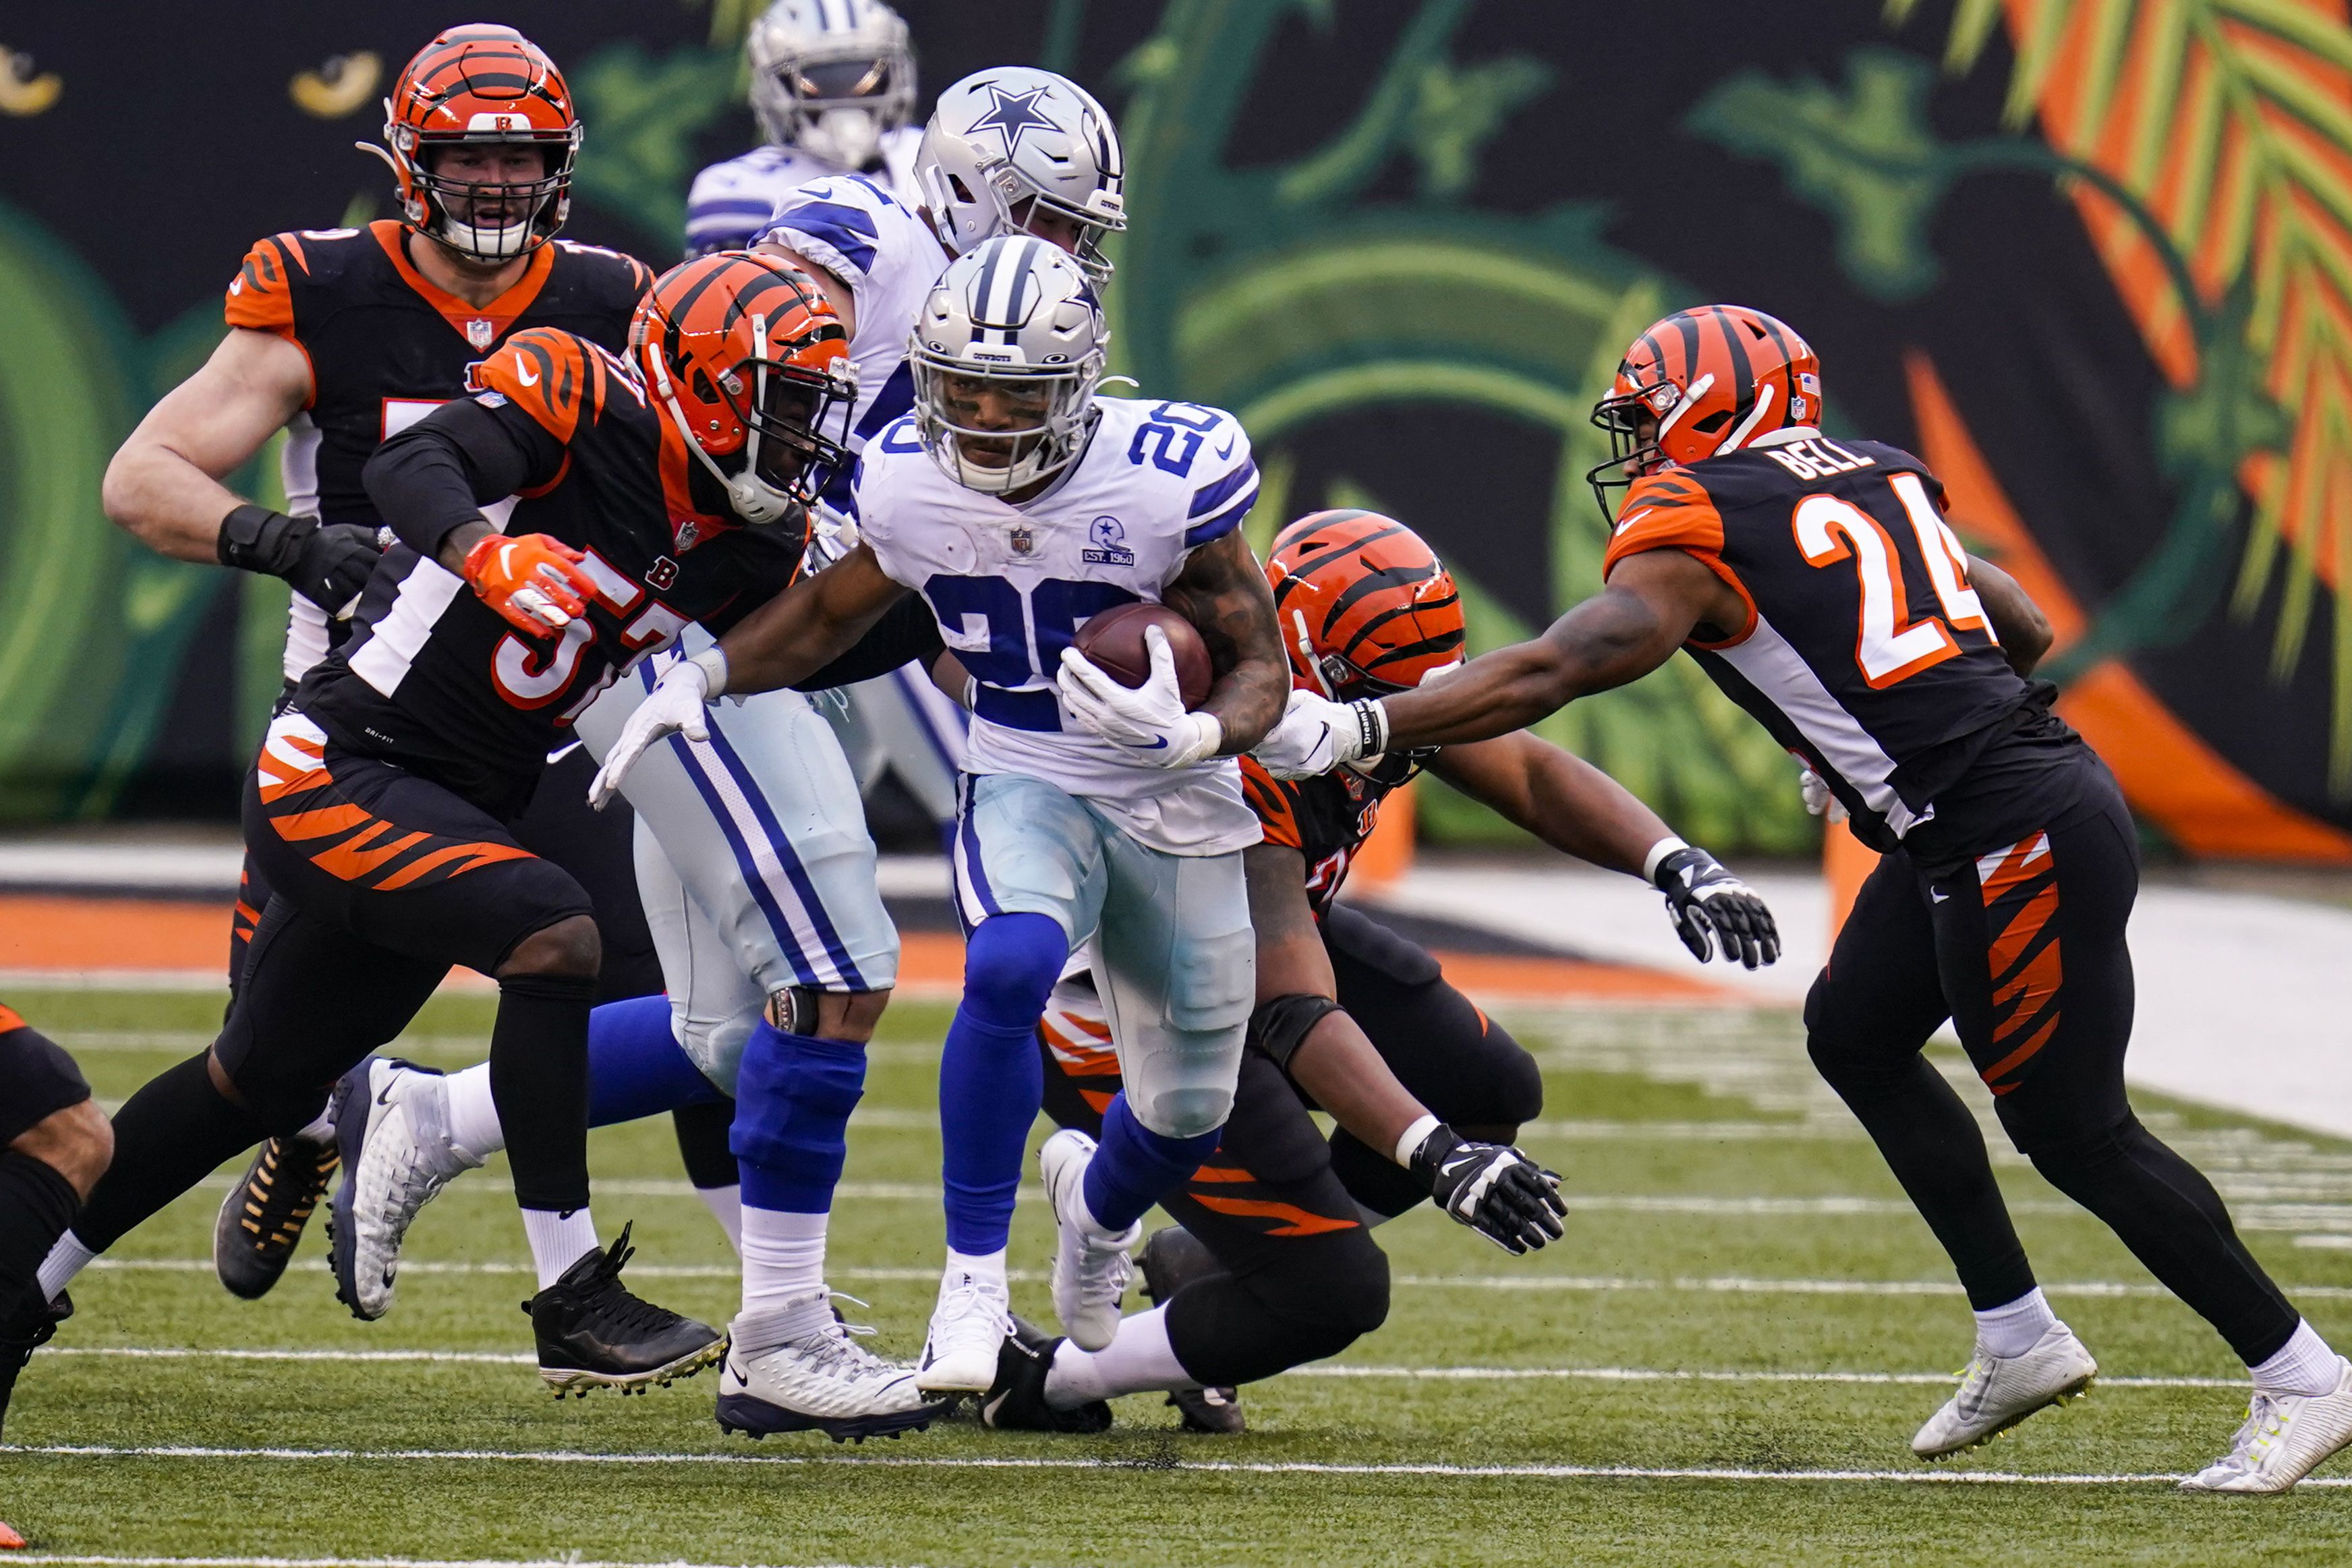 Film room: 3 things we learned from Cowboys-Bengals, including why